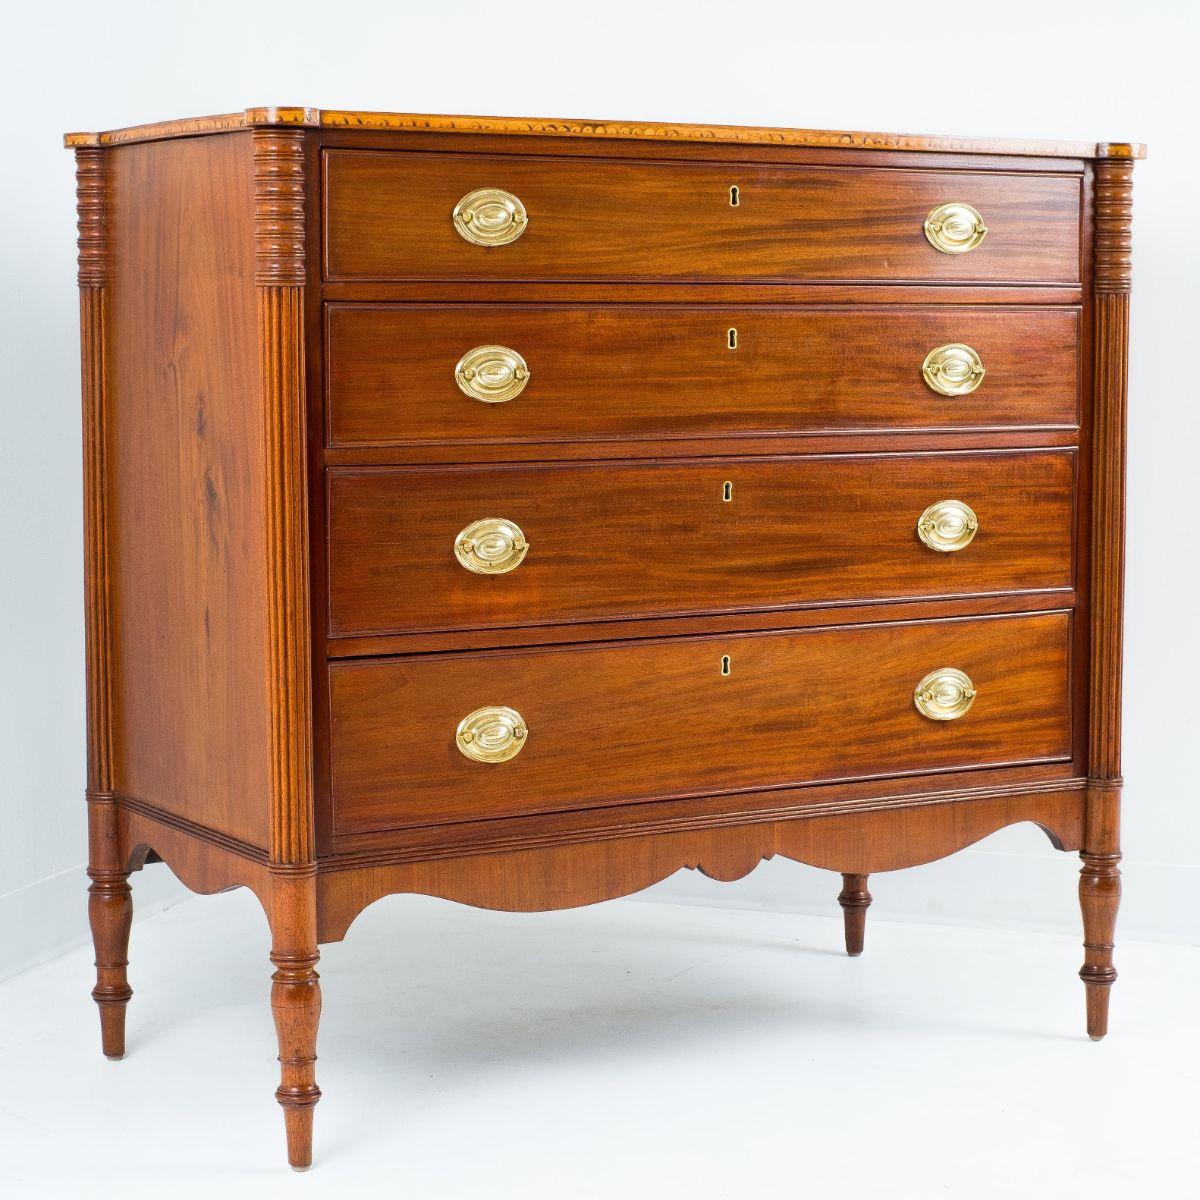 Early 19th Century Sheraton Mahogany Four Drawer Chest In Excellent Condition For Sale In Kenilworth, IL